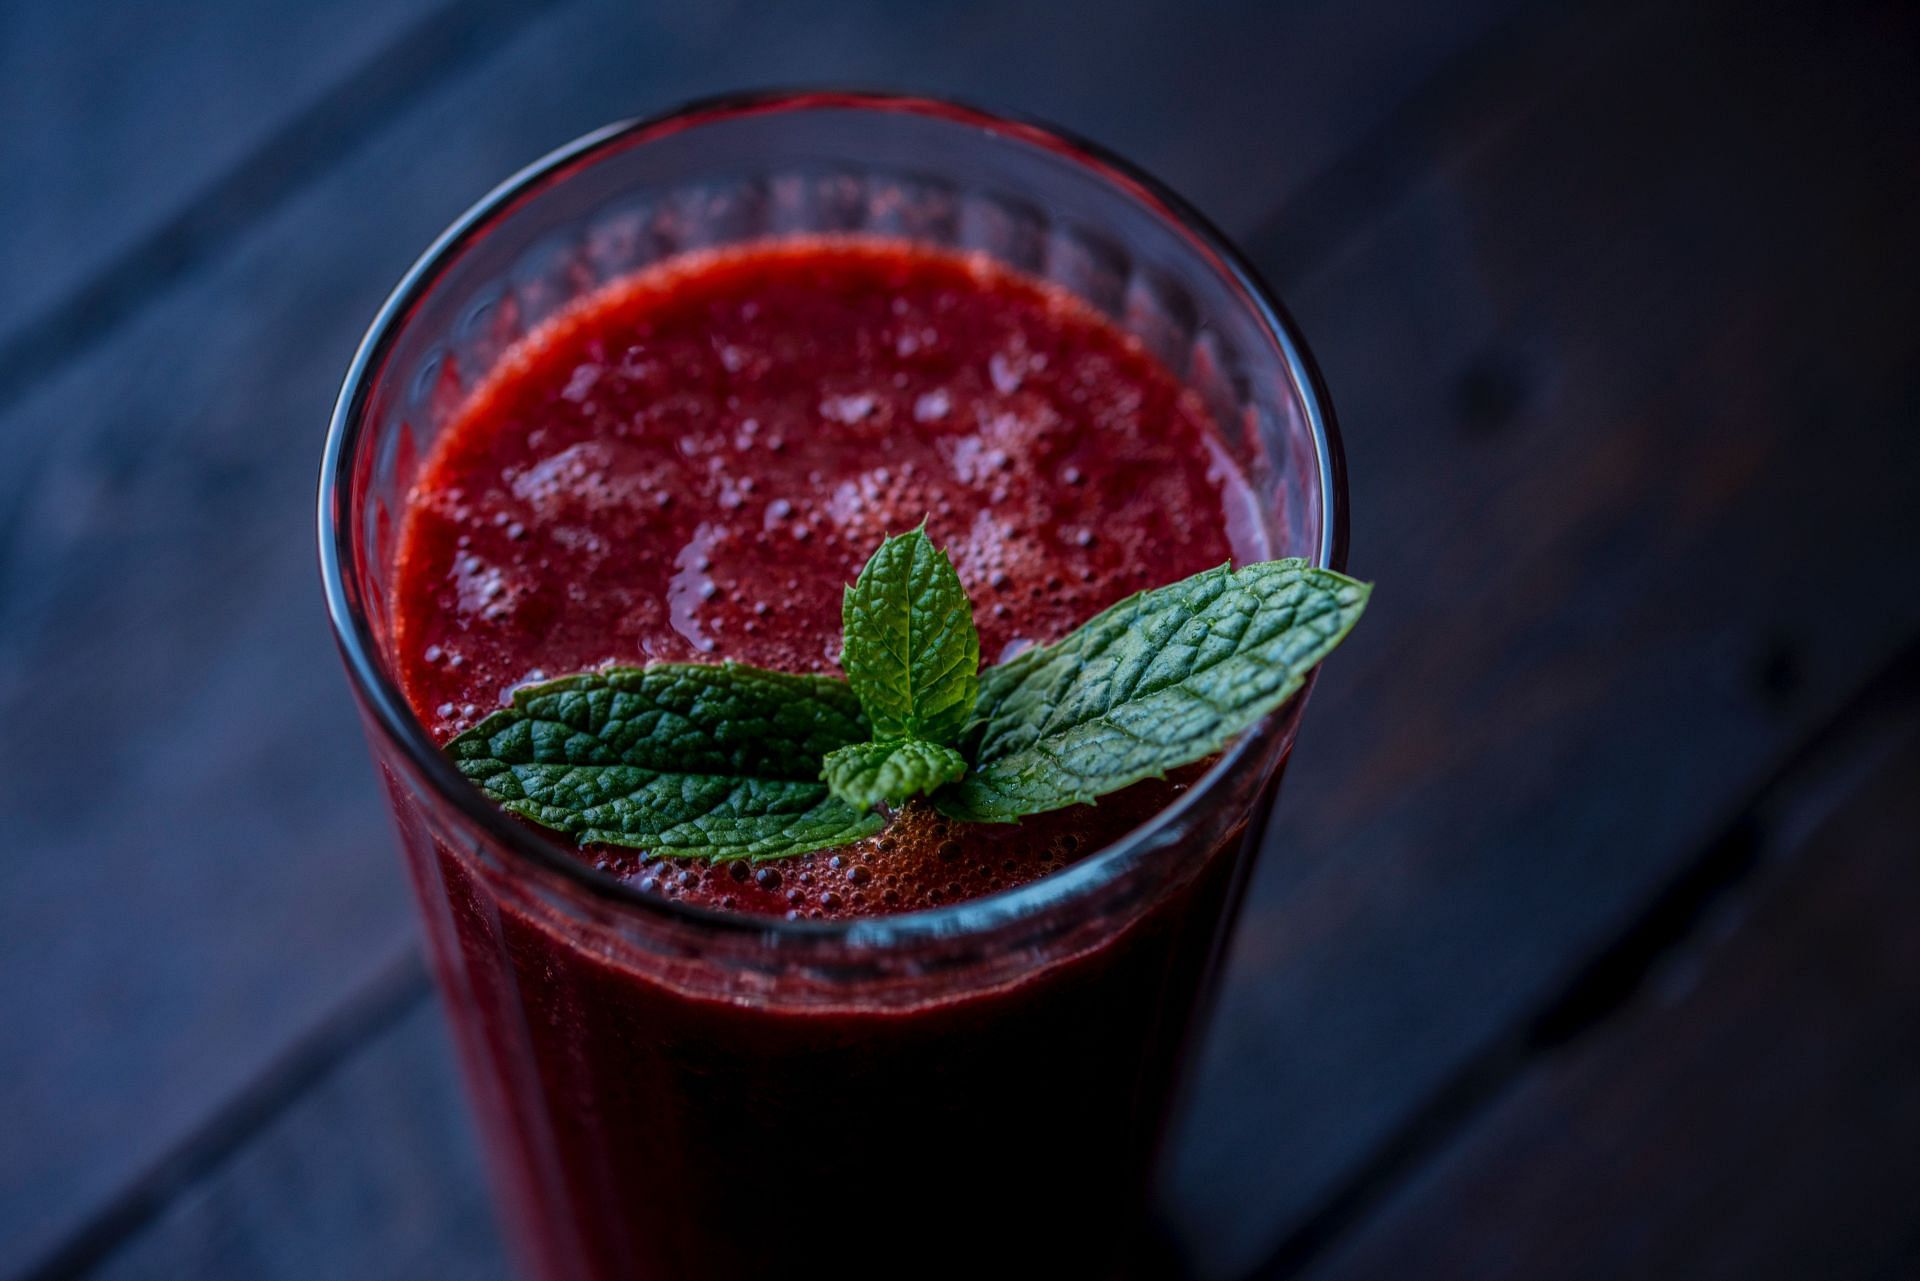 Juice cleanses can flush out toxins from your body (Joanna Kosinska)